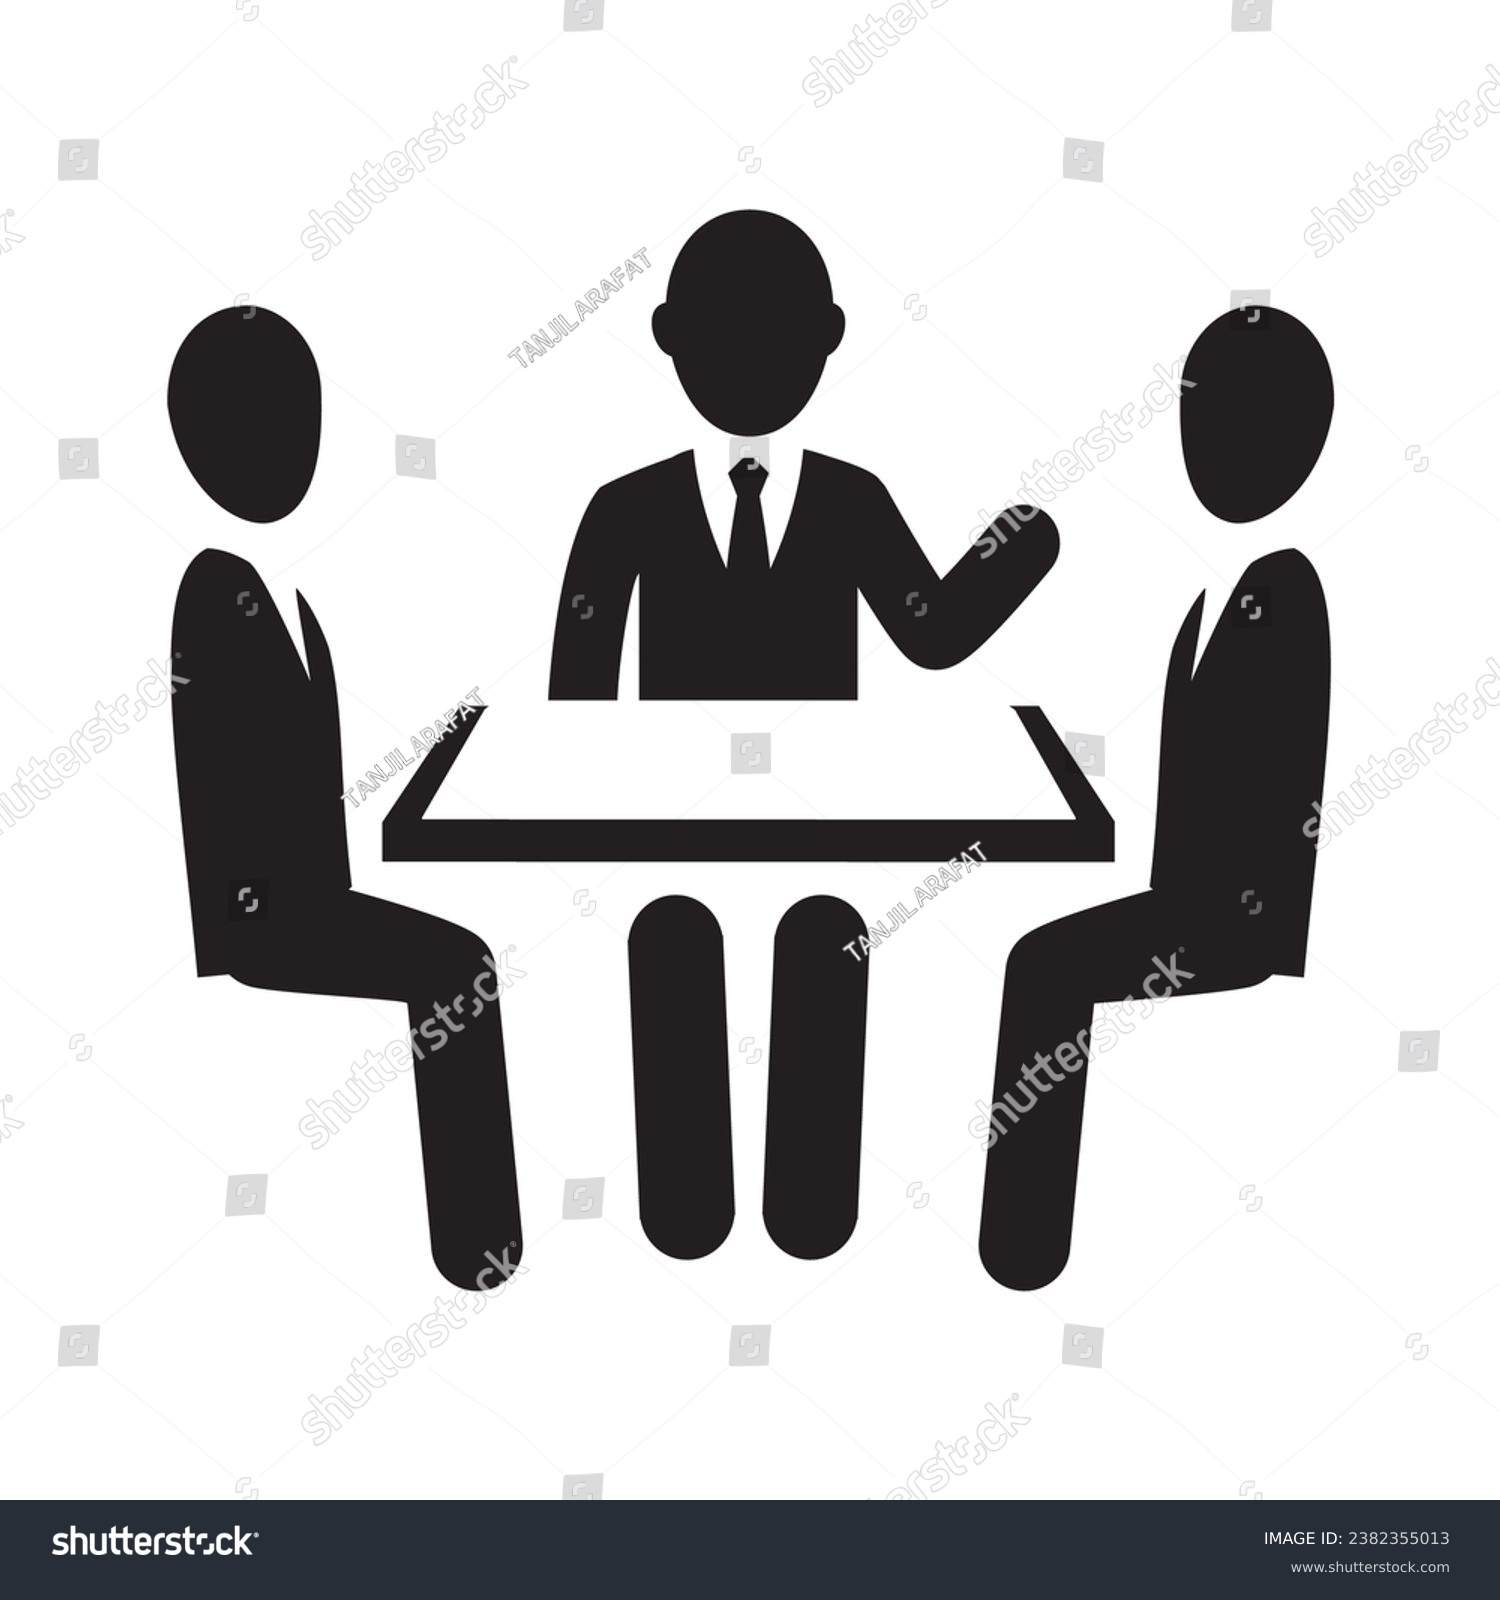 SVG of Brainstorming and teamwork icon. Business meeting. Debate team. Discussion group. People in conference room sitting around a table working together on new creative projects. svg